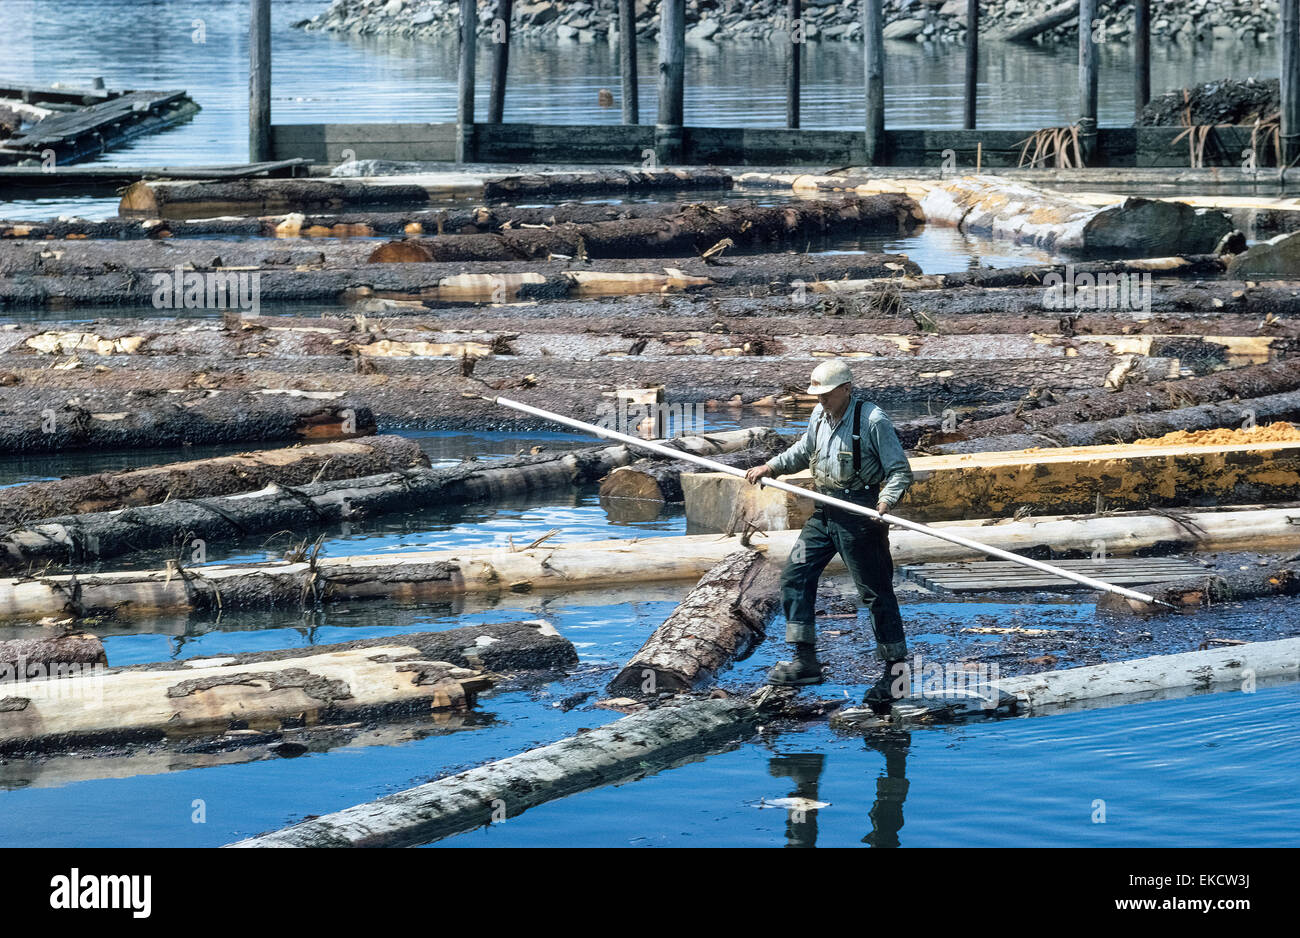 A lumberjack walks cautiously on floating logs as he moves them into position for processing at a sawmill on Wrangell Island in Southeast Alaska, USA. He uses a long pole for balancing himself and for pushing and pulling the logs. Restrictions on timber harvesting have diminished the importance of wood products to the local Wrangell economy since this photograph was taken in 1967. Stock Photo